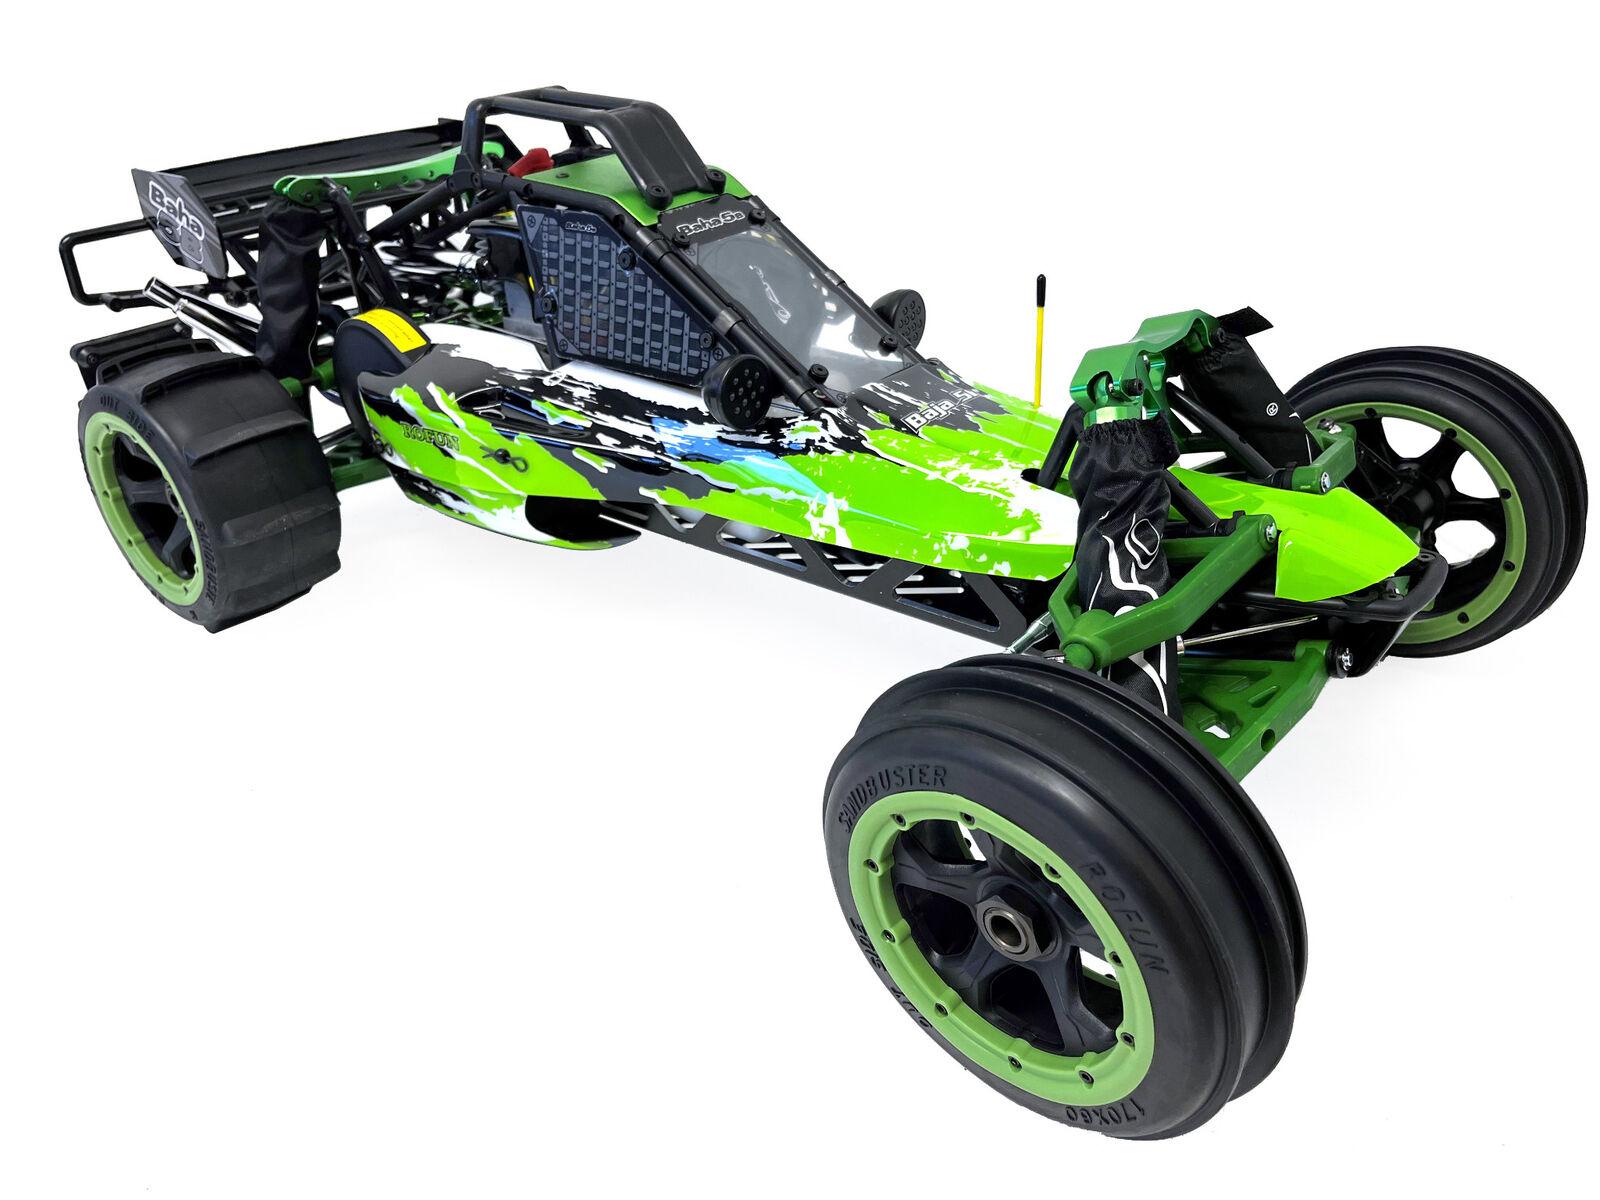 Baja Rc Car: Essential Gear and Online Resources for the Baja RC Car Enthusiast 